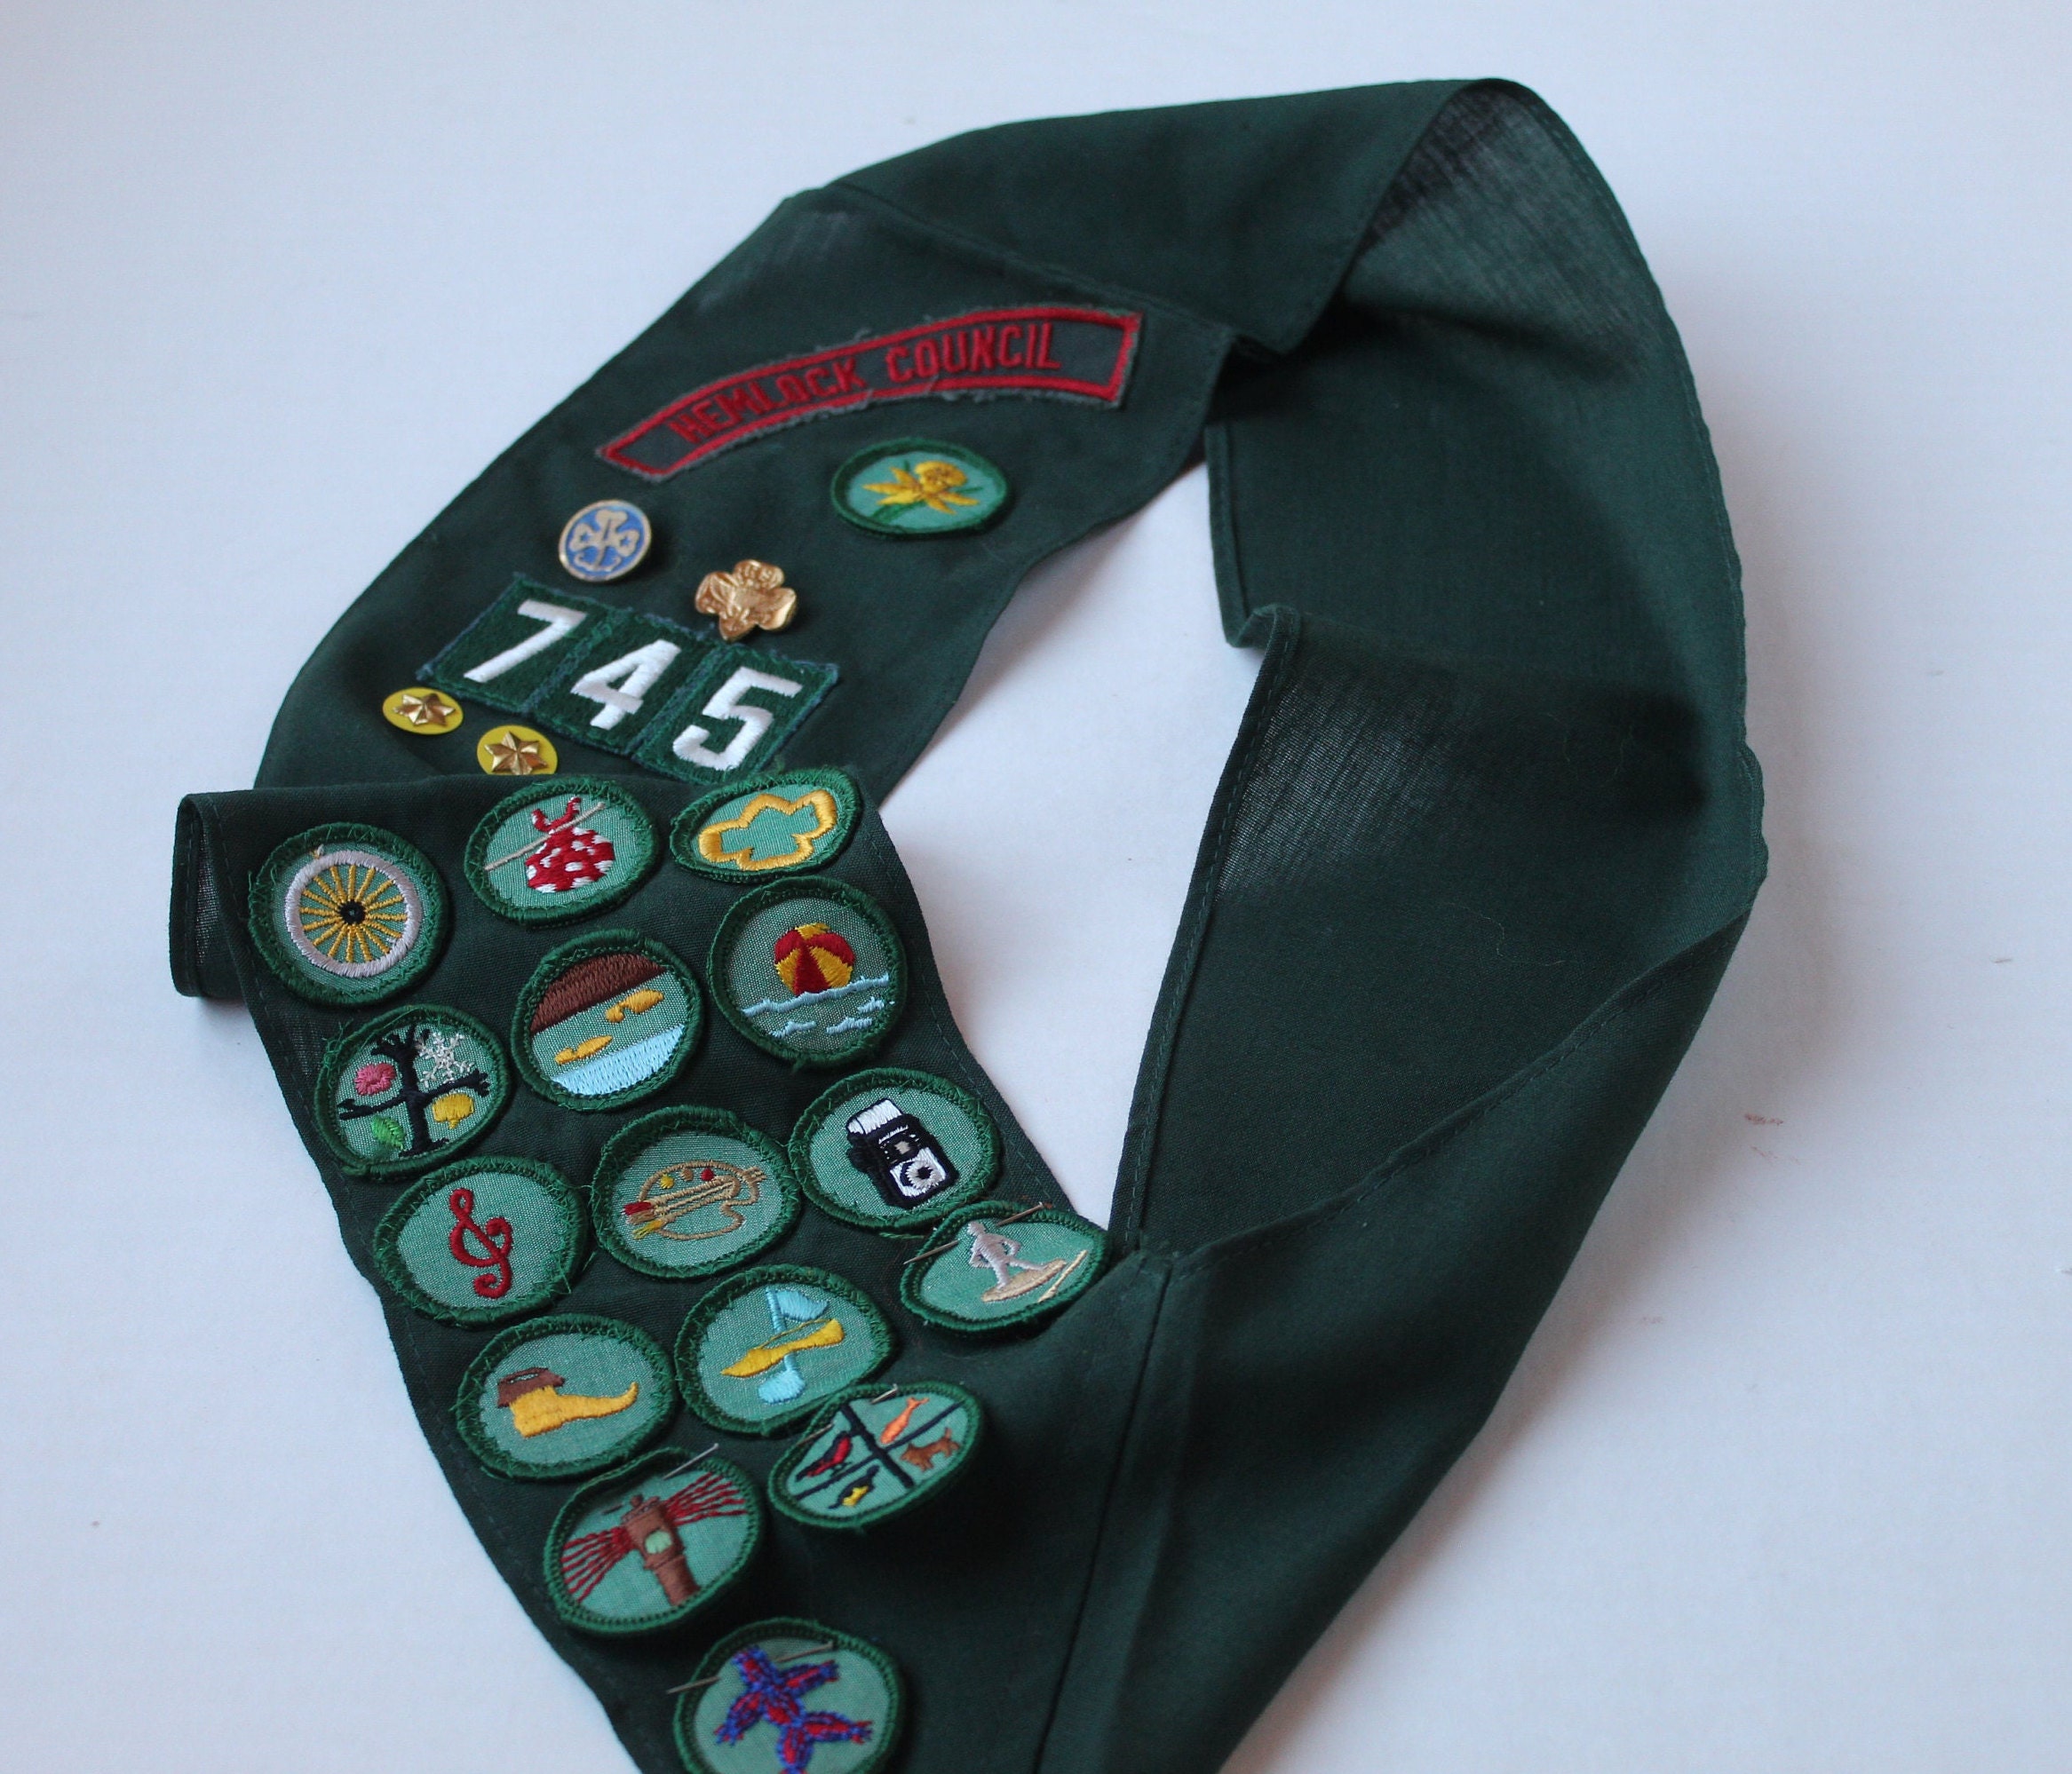 Vintage Girl Scout Boy Scout Patches 